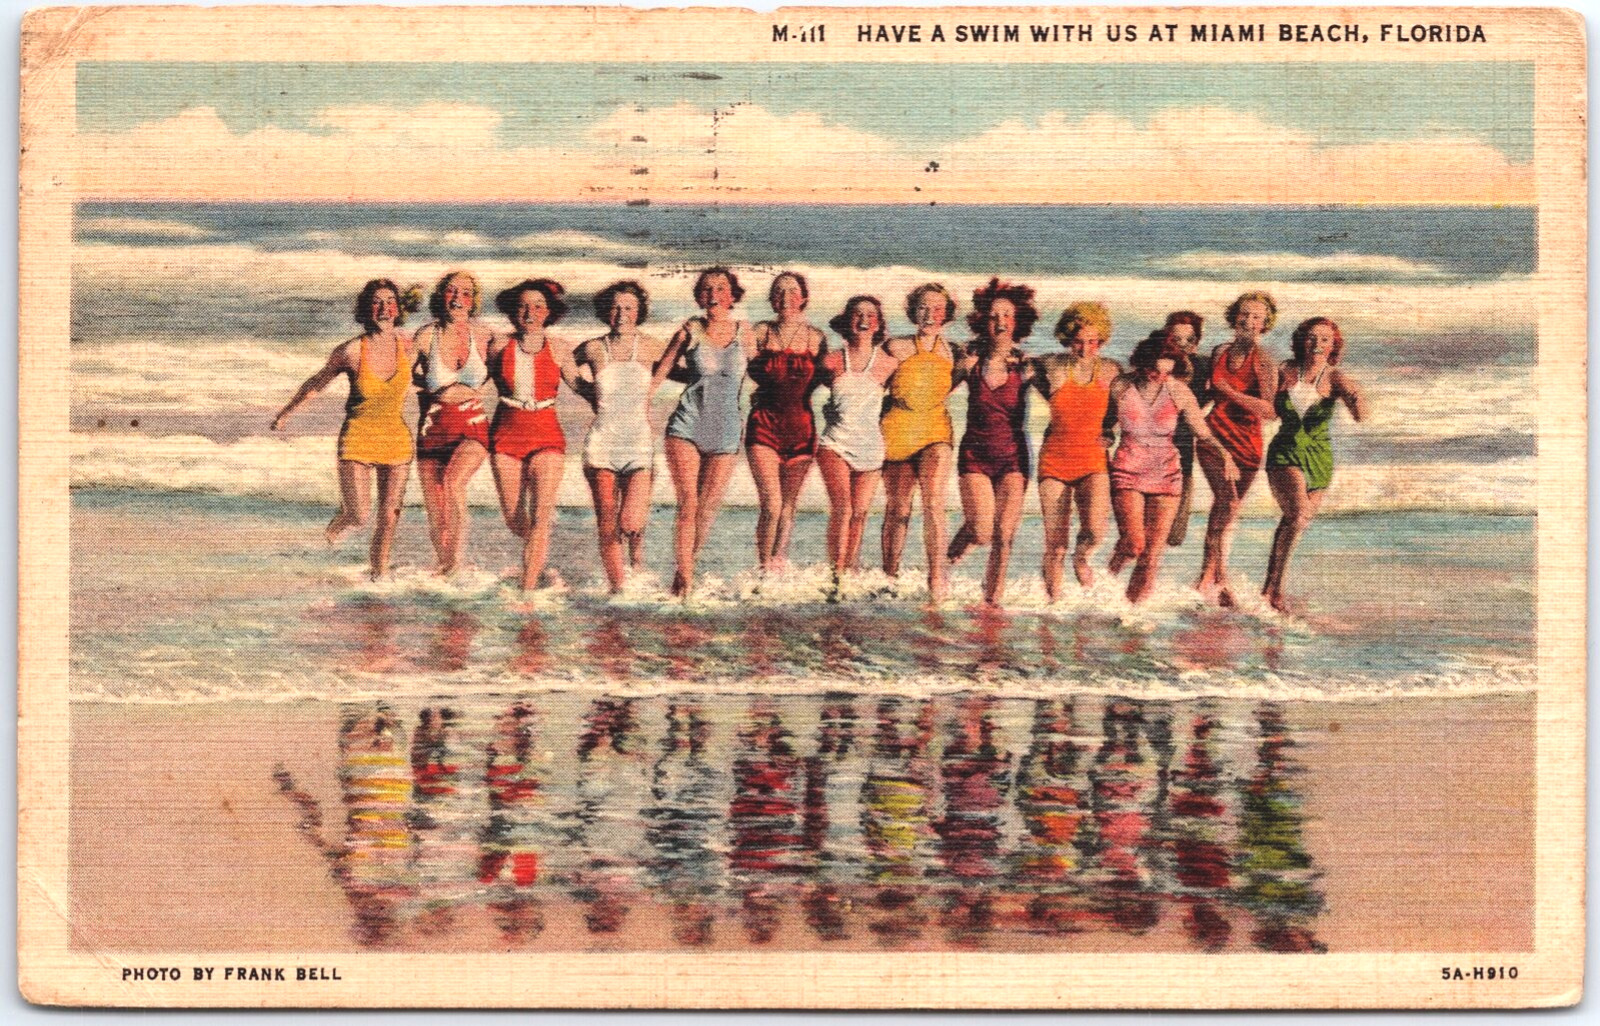 VINTAGE POSTCARD ICONIC IMAGE OF LINE OF (14) WOMEN BATHERS AT MIAMI BEACH 1938